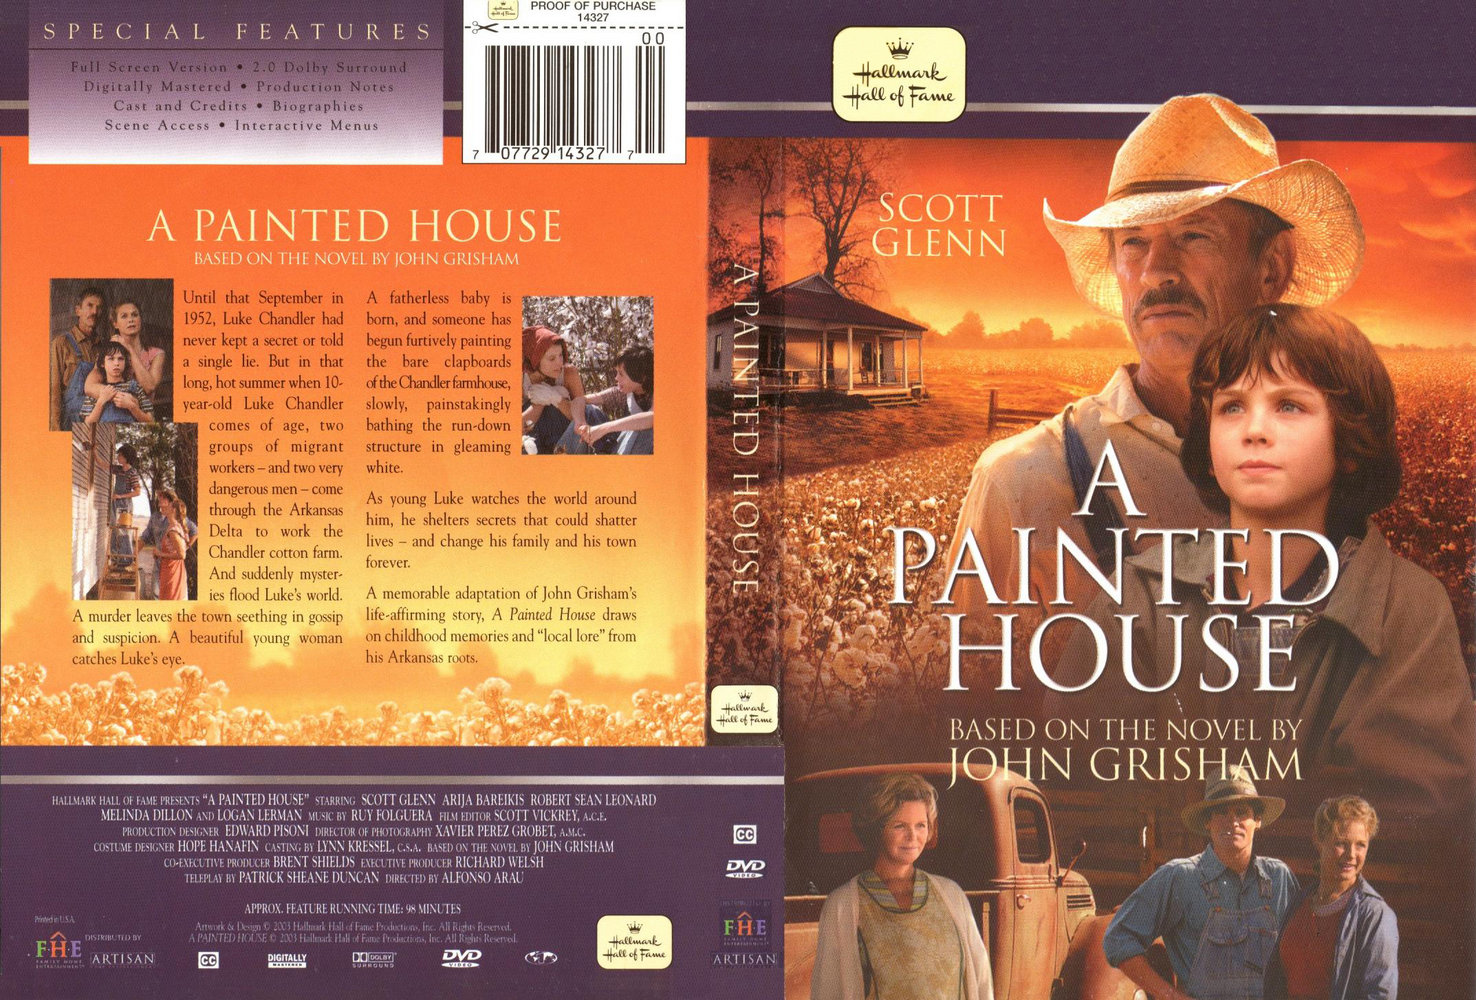 Jaquette DVD A painted house Zone 1.